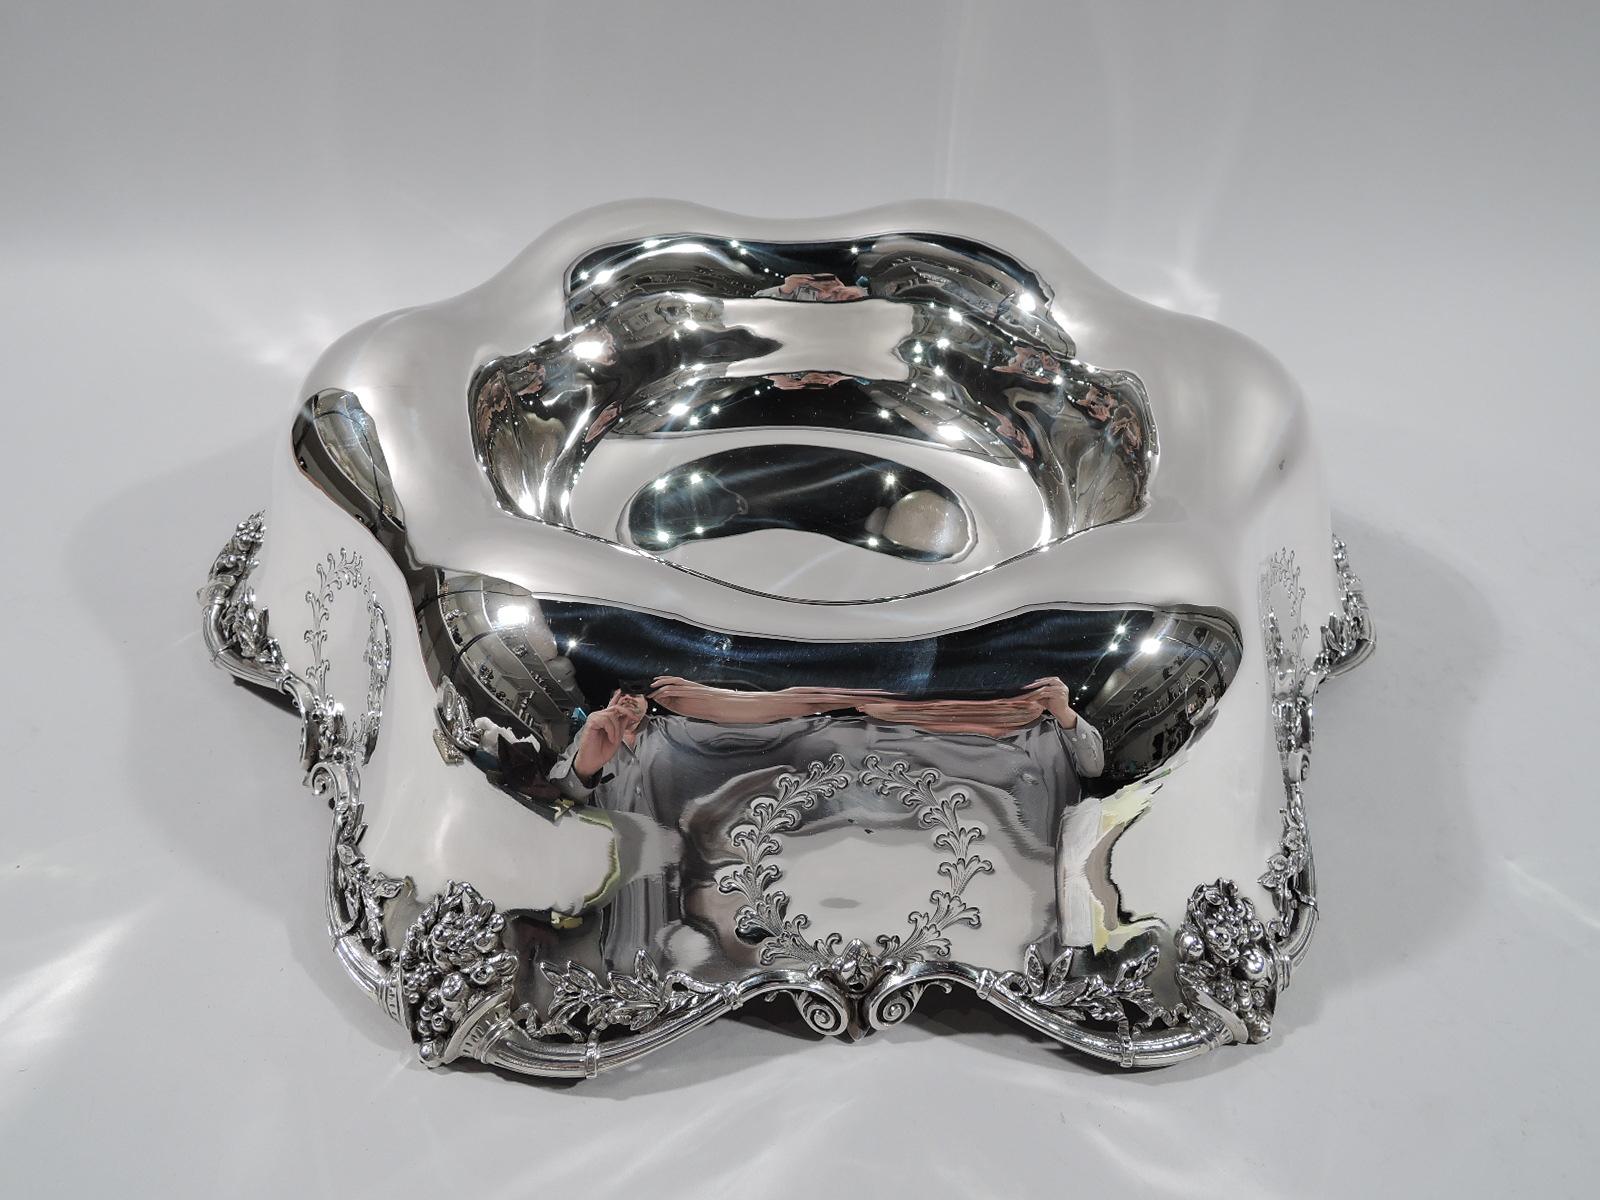 Edwardian Regency sterling silver centerpiece bowl. Made by Redlich in New York, circa 1910. Round and deep well with waving rolled edge engraved with laurel wreaths. Scrolled cornucopia applied to rim. Substantial with nice heft. Fully marked